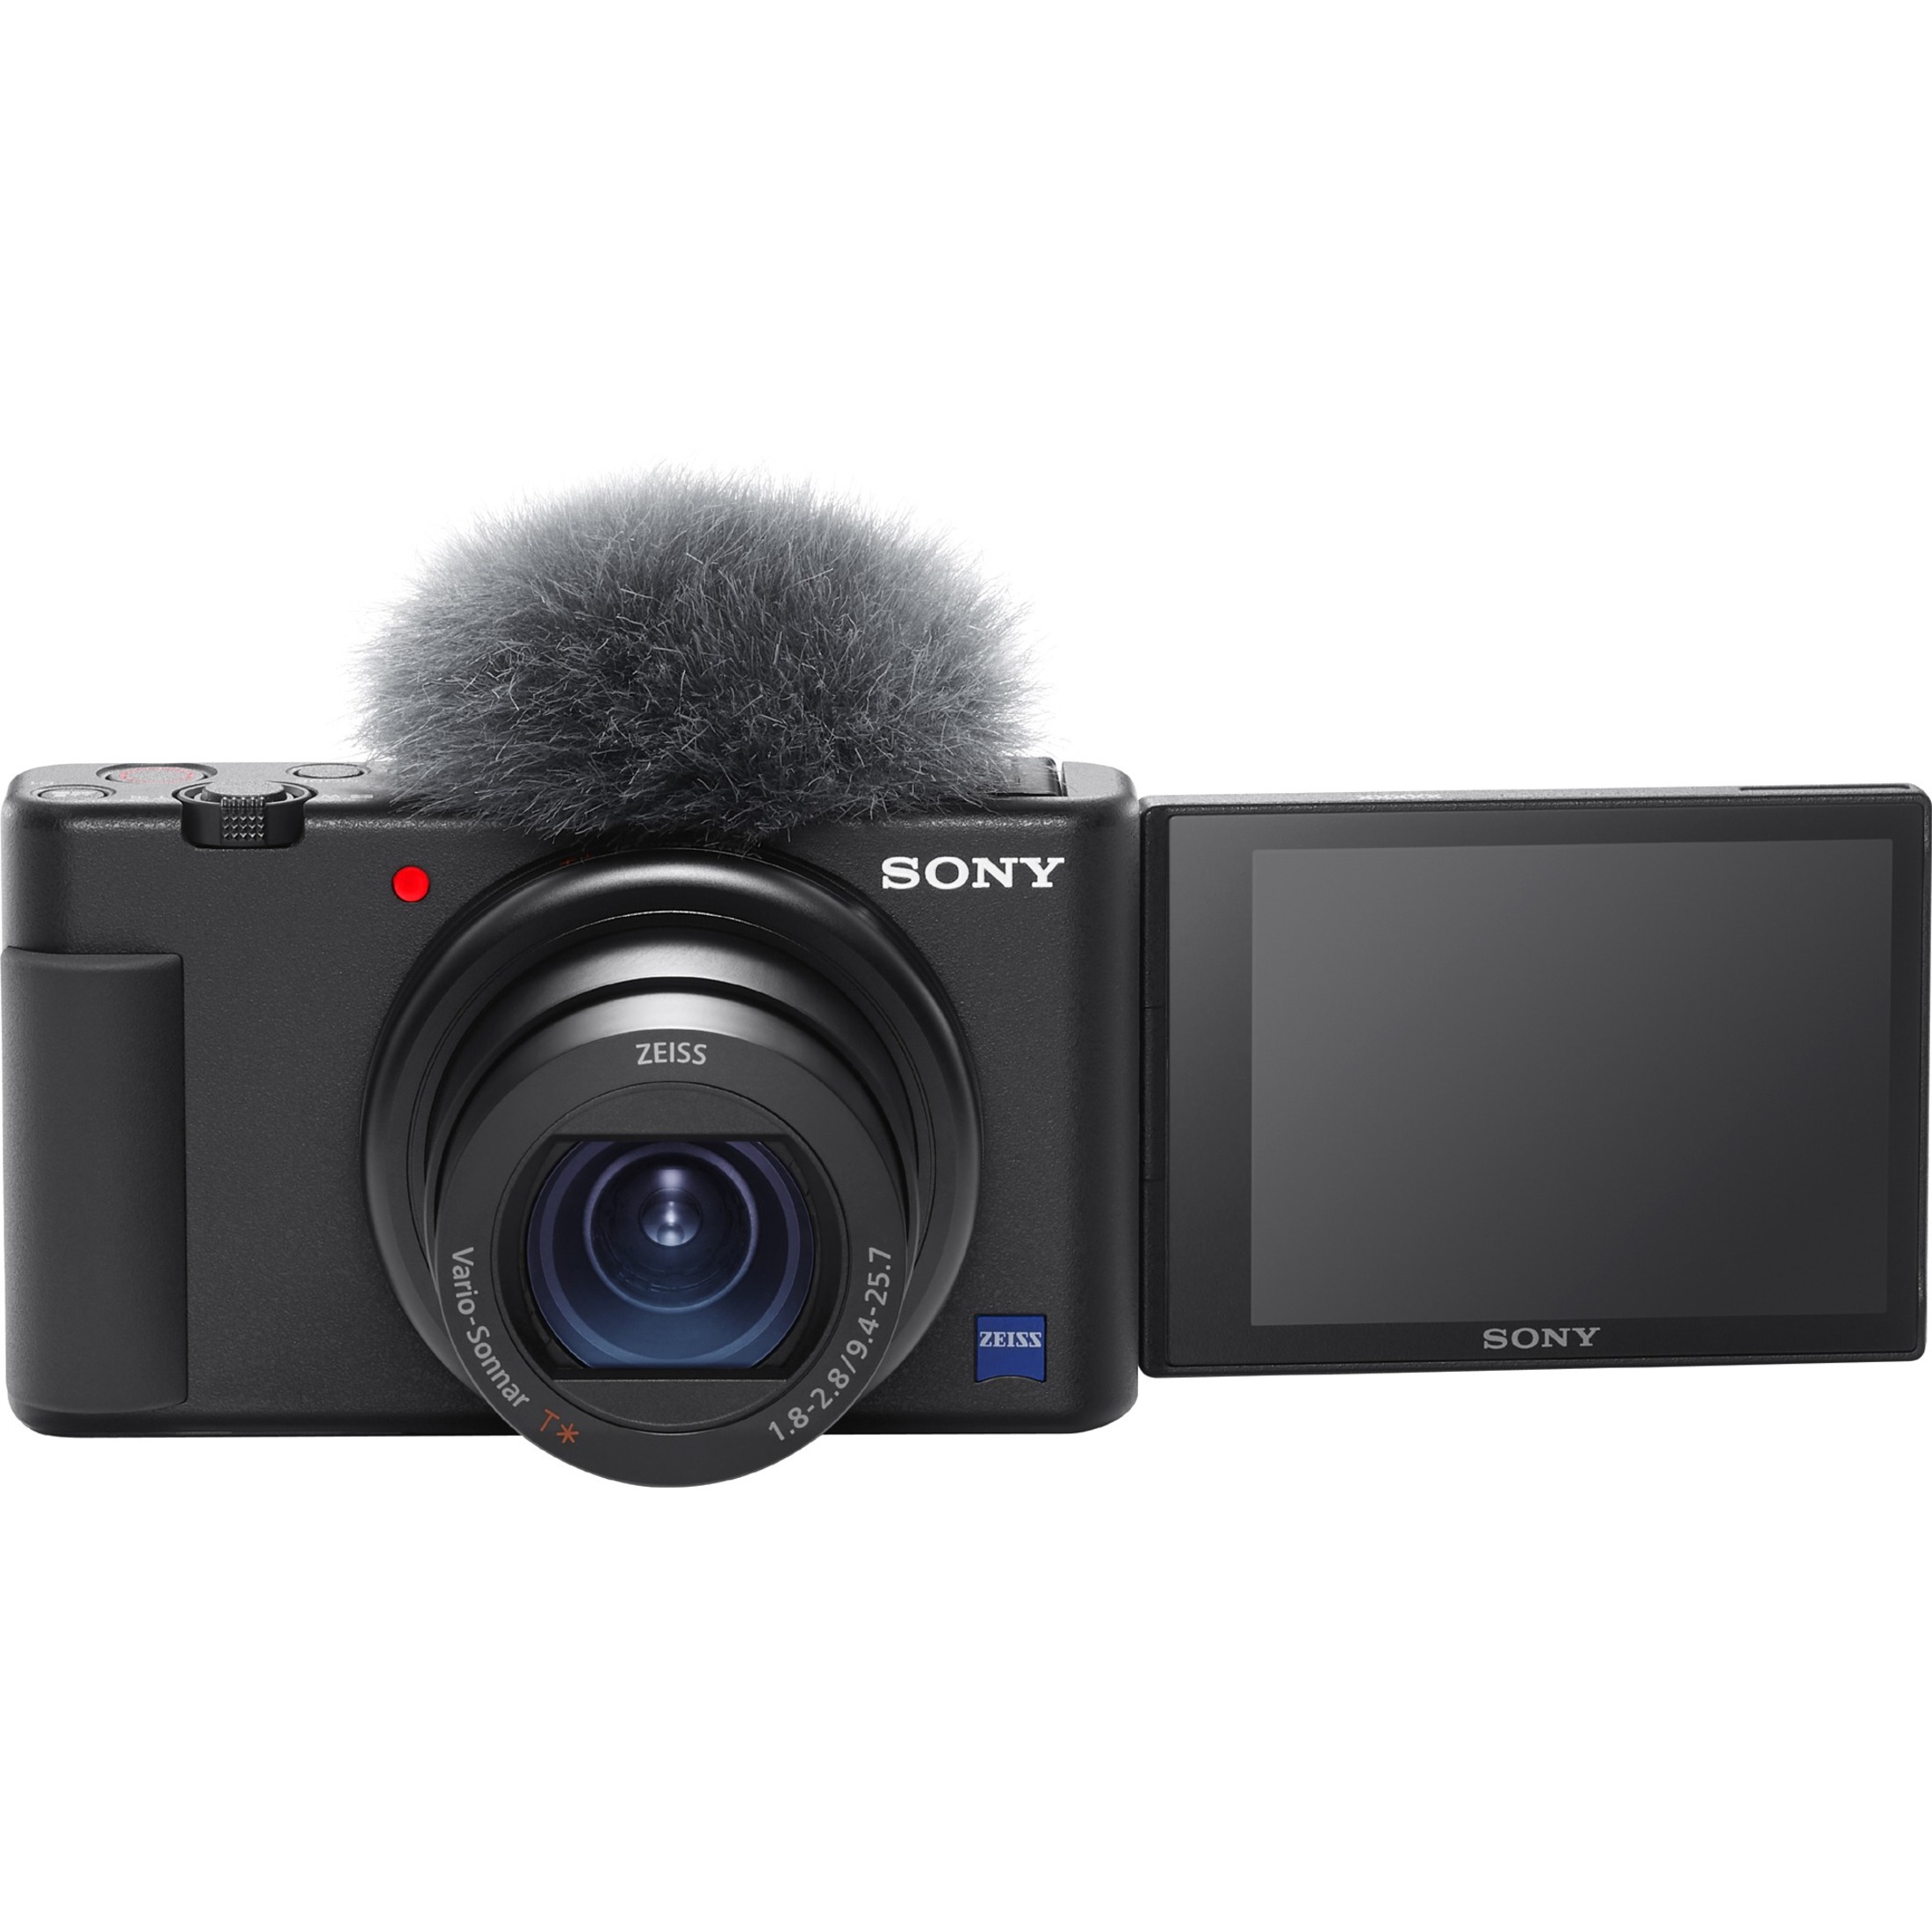 Sony ZV-1 20.1 Megapixel Compact Camera, Black - image 14 of 29